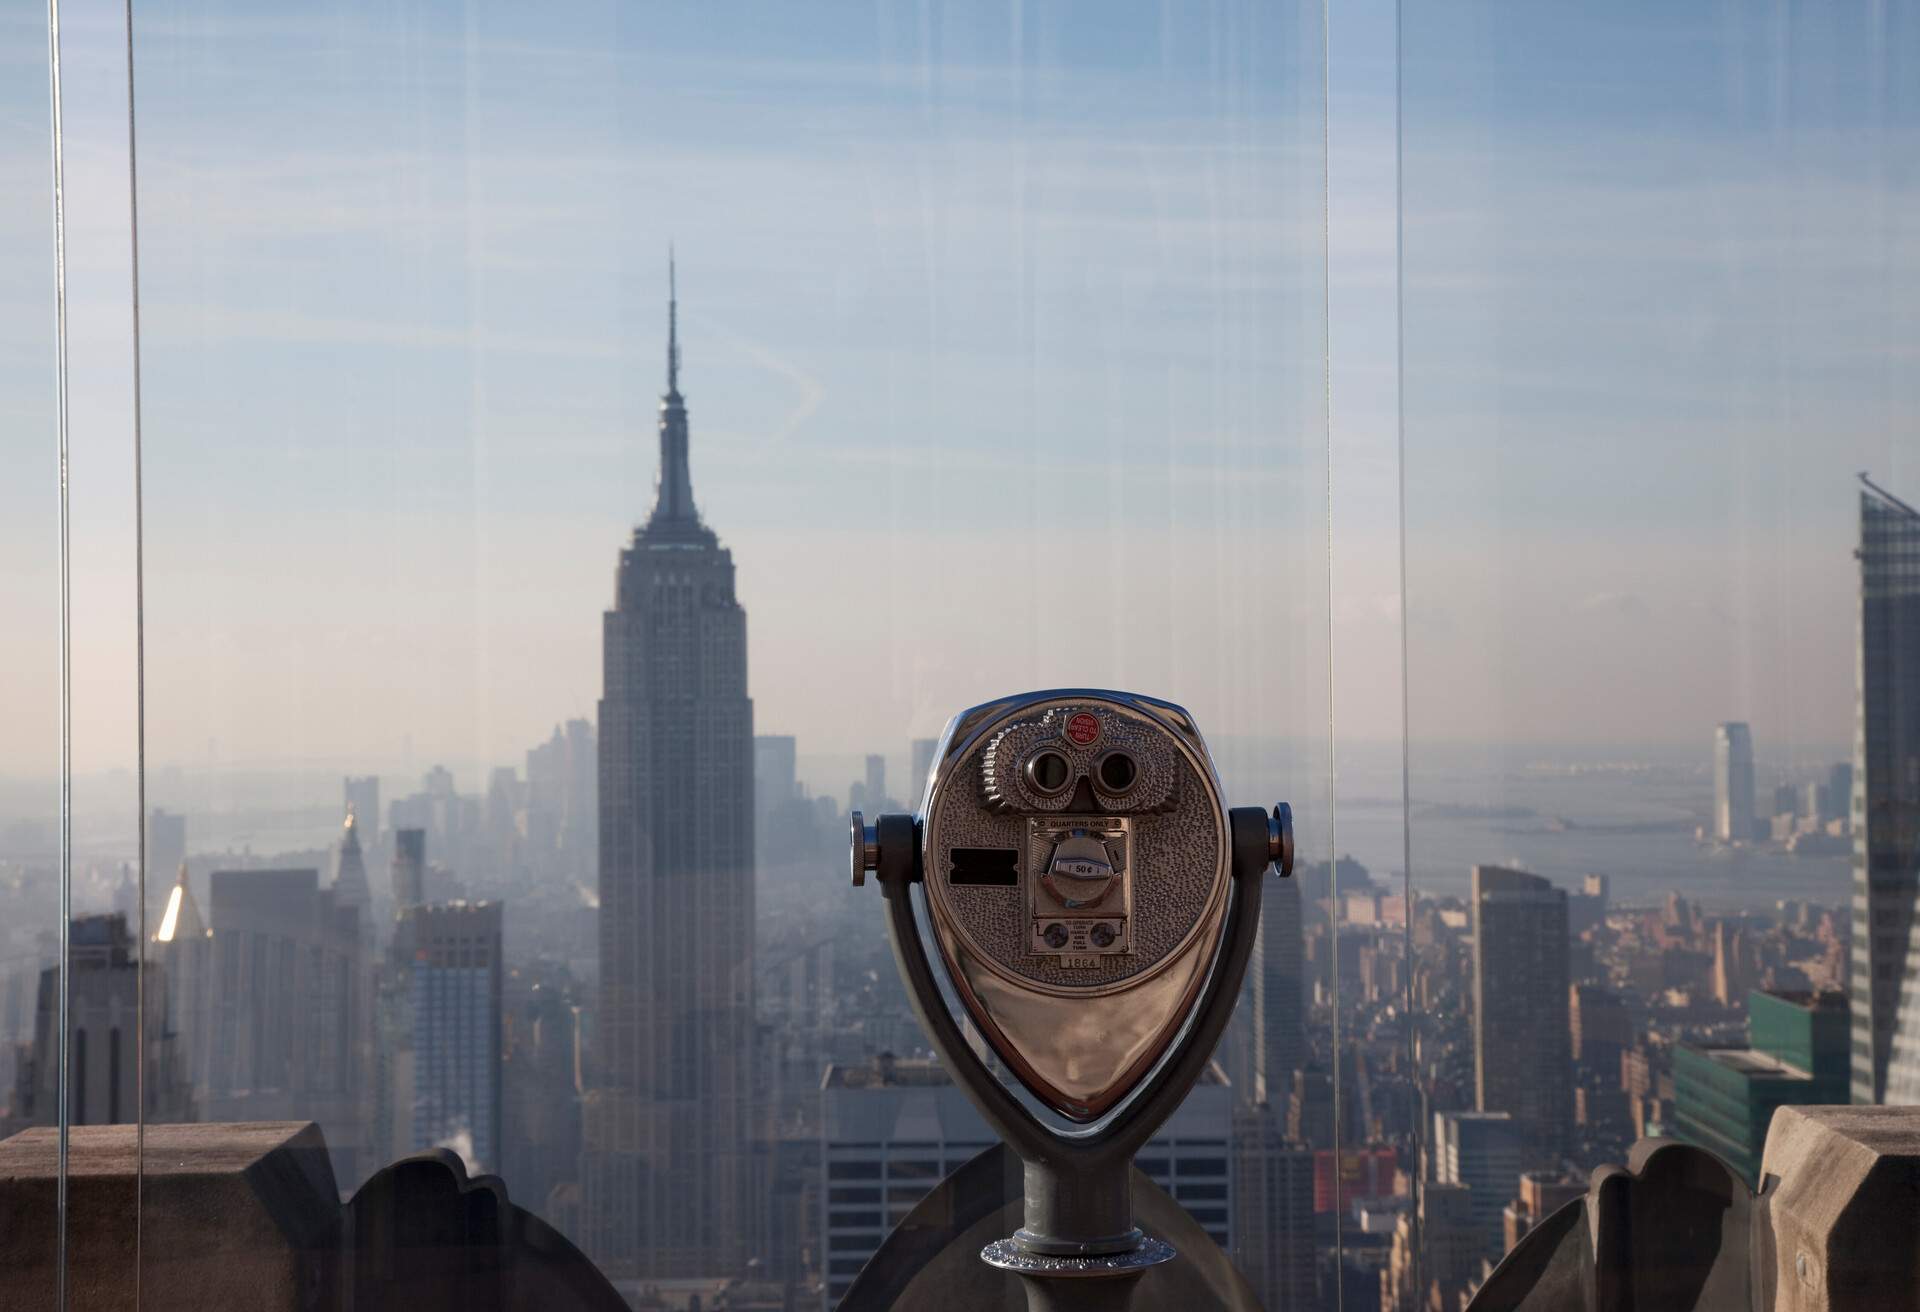 A coin operated binoculars on a rooftop pointing at a vast cityscape.